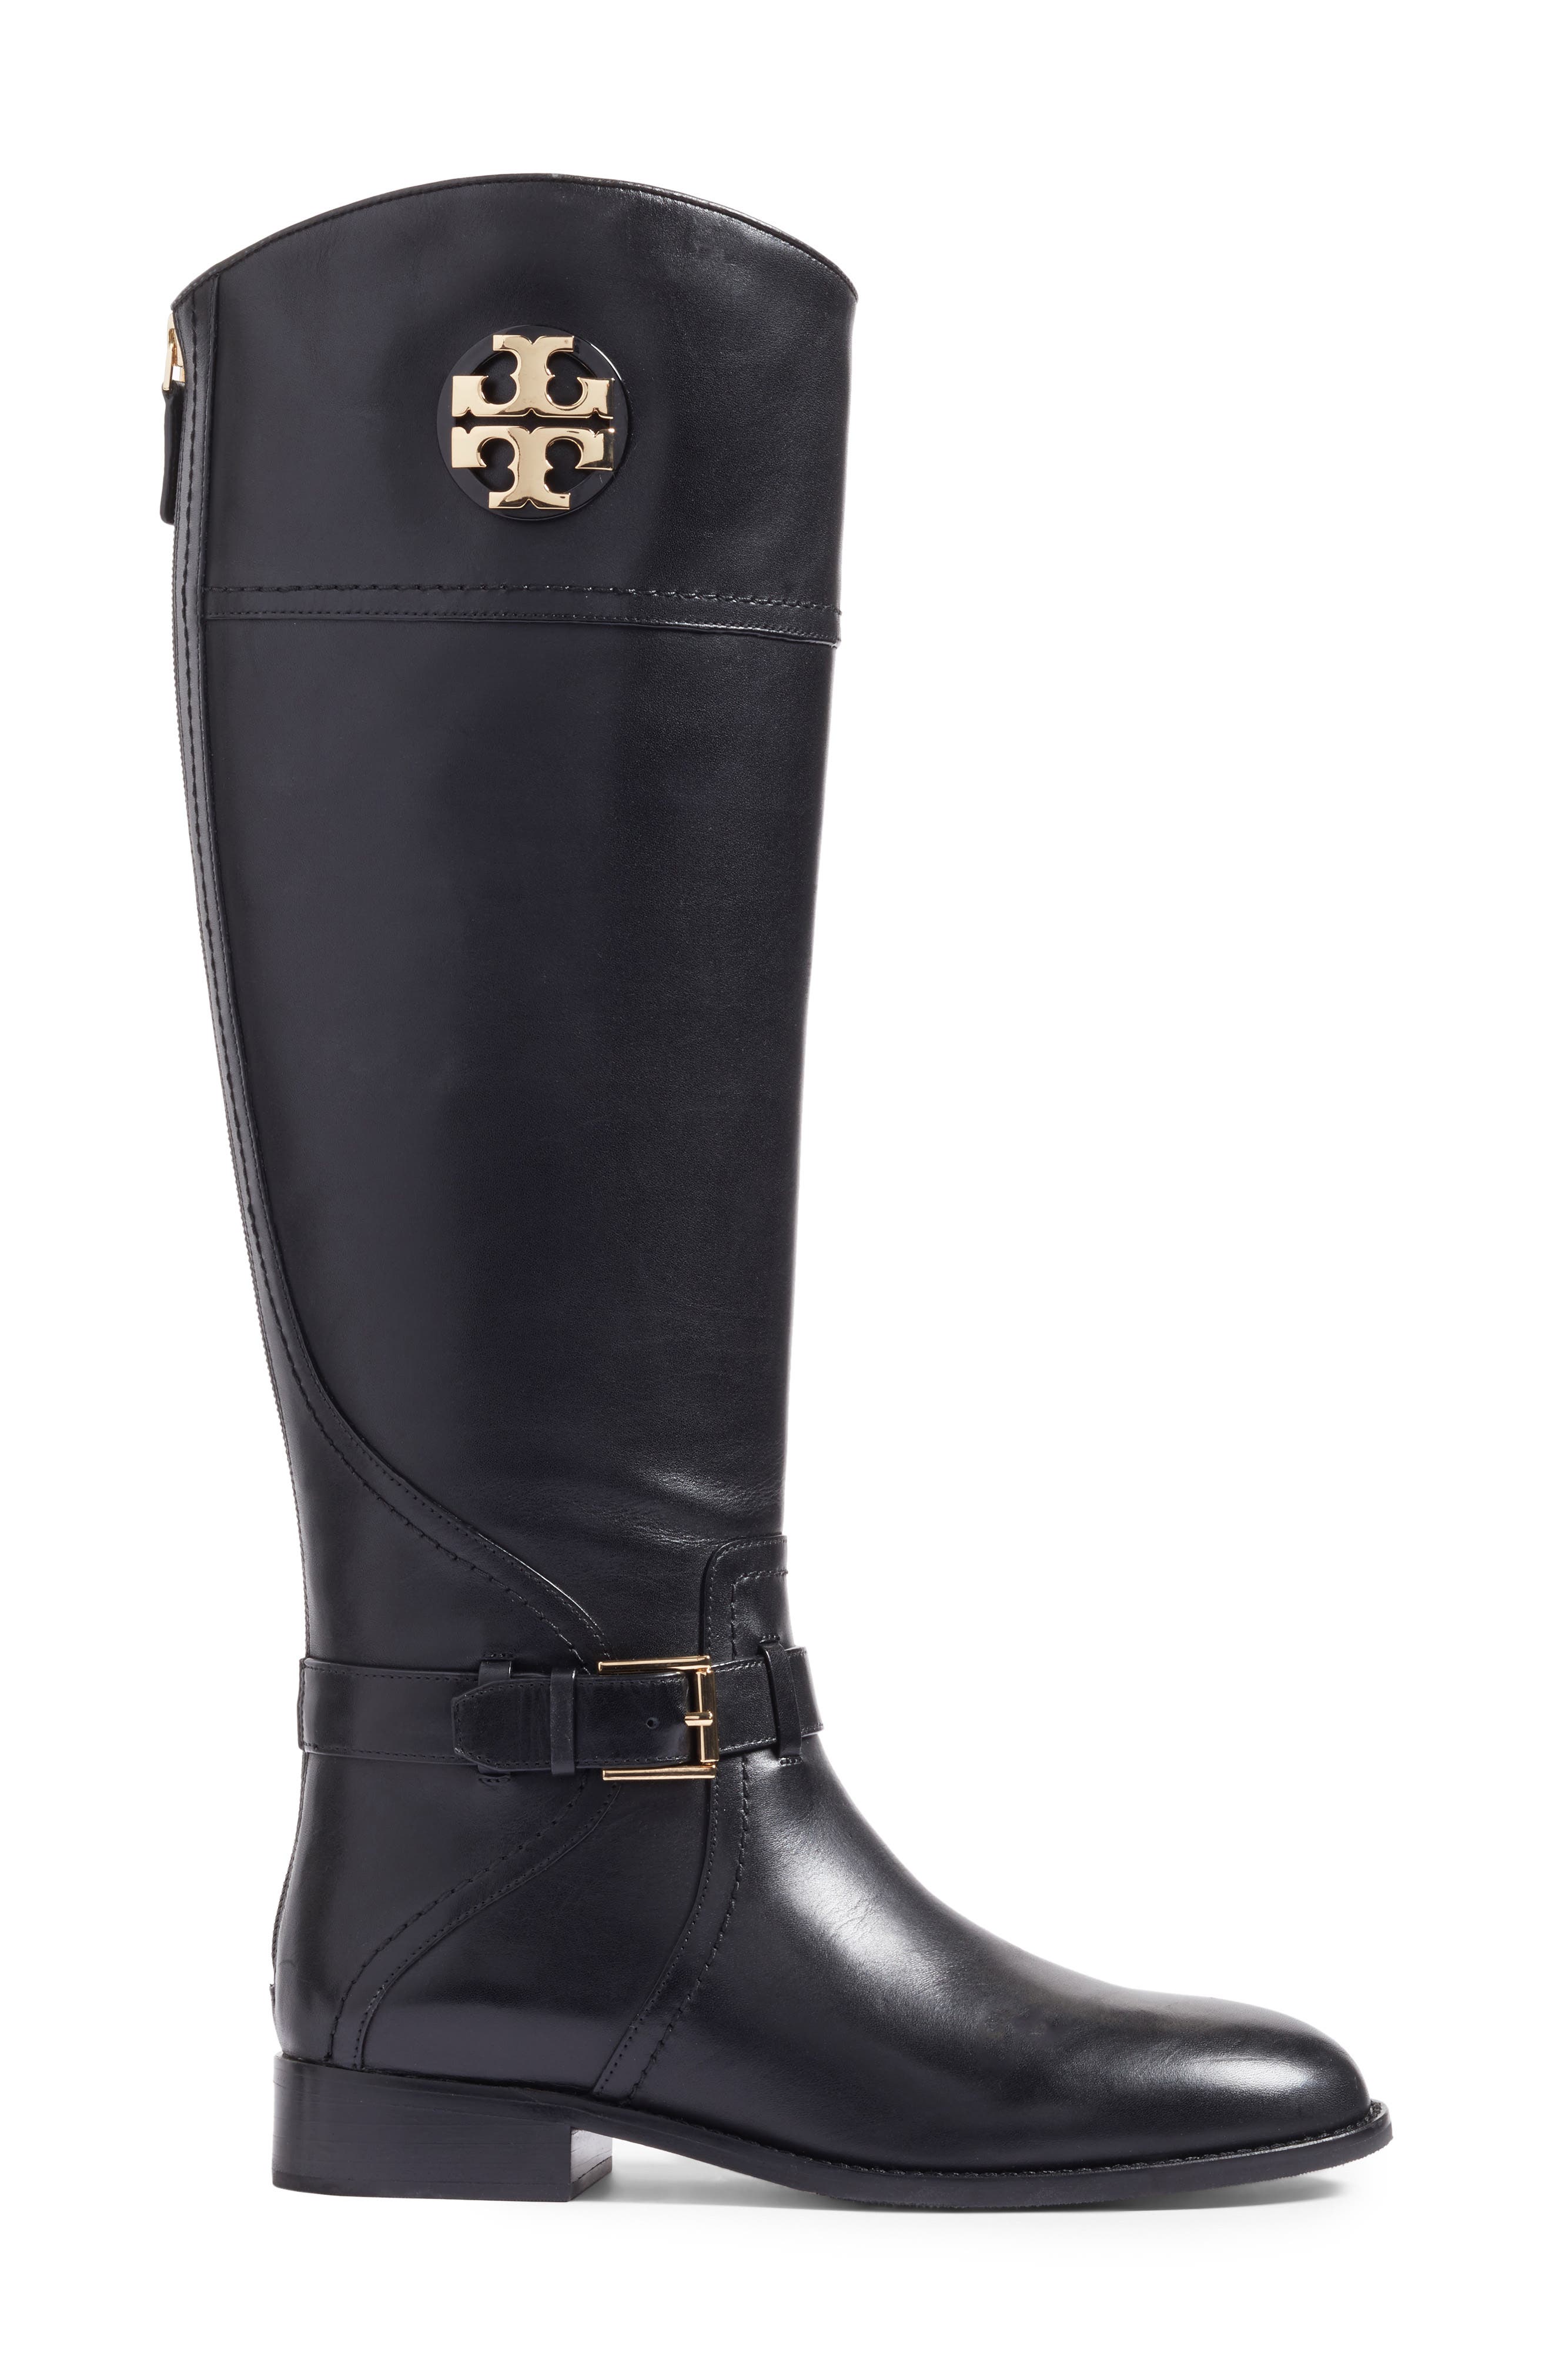 tory burch nadine riding boots